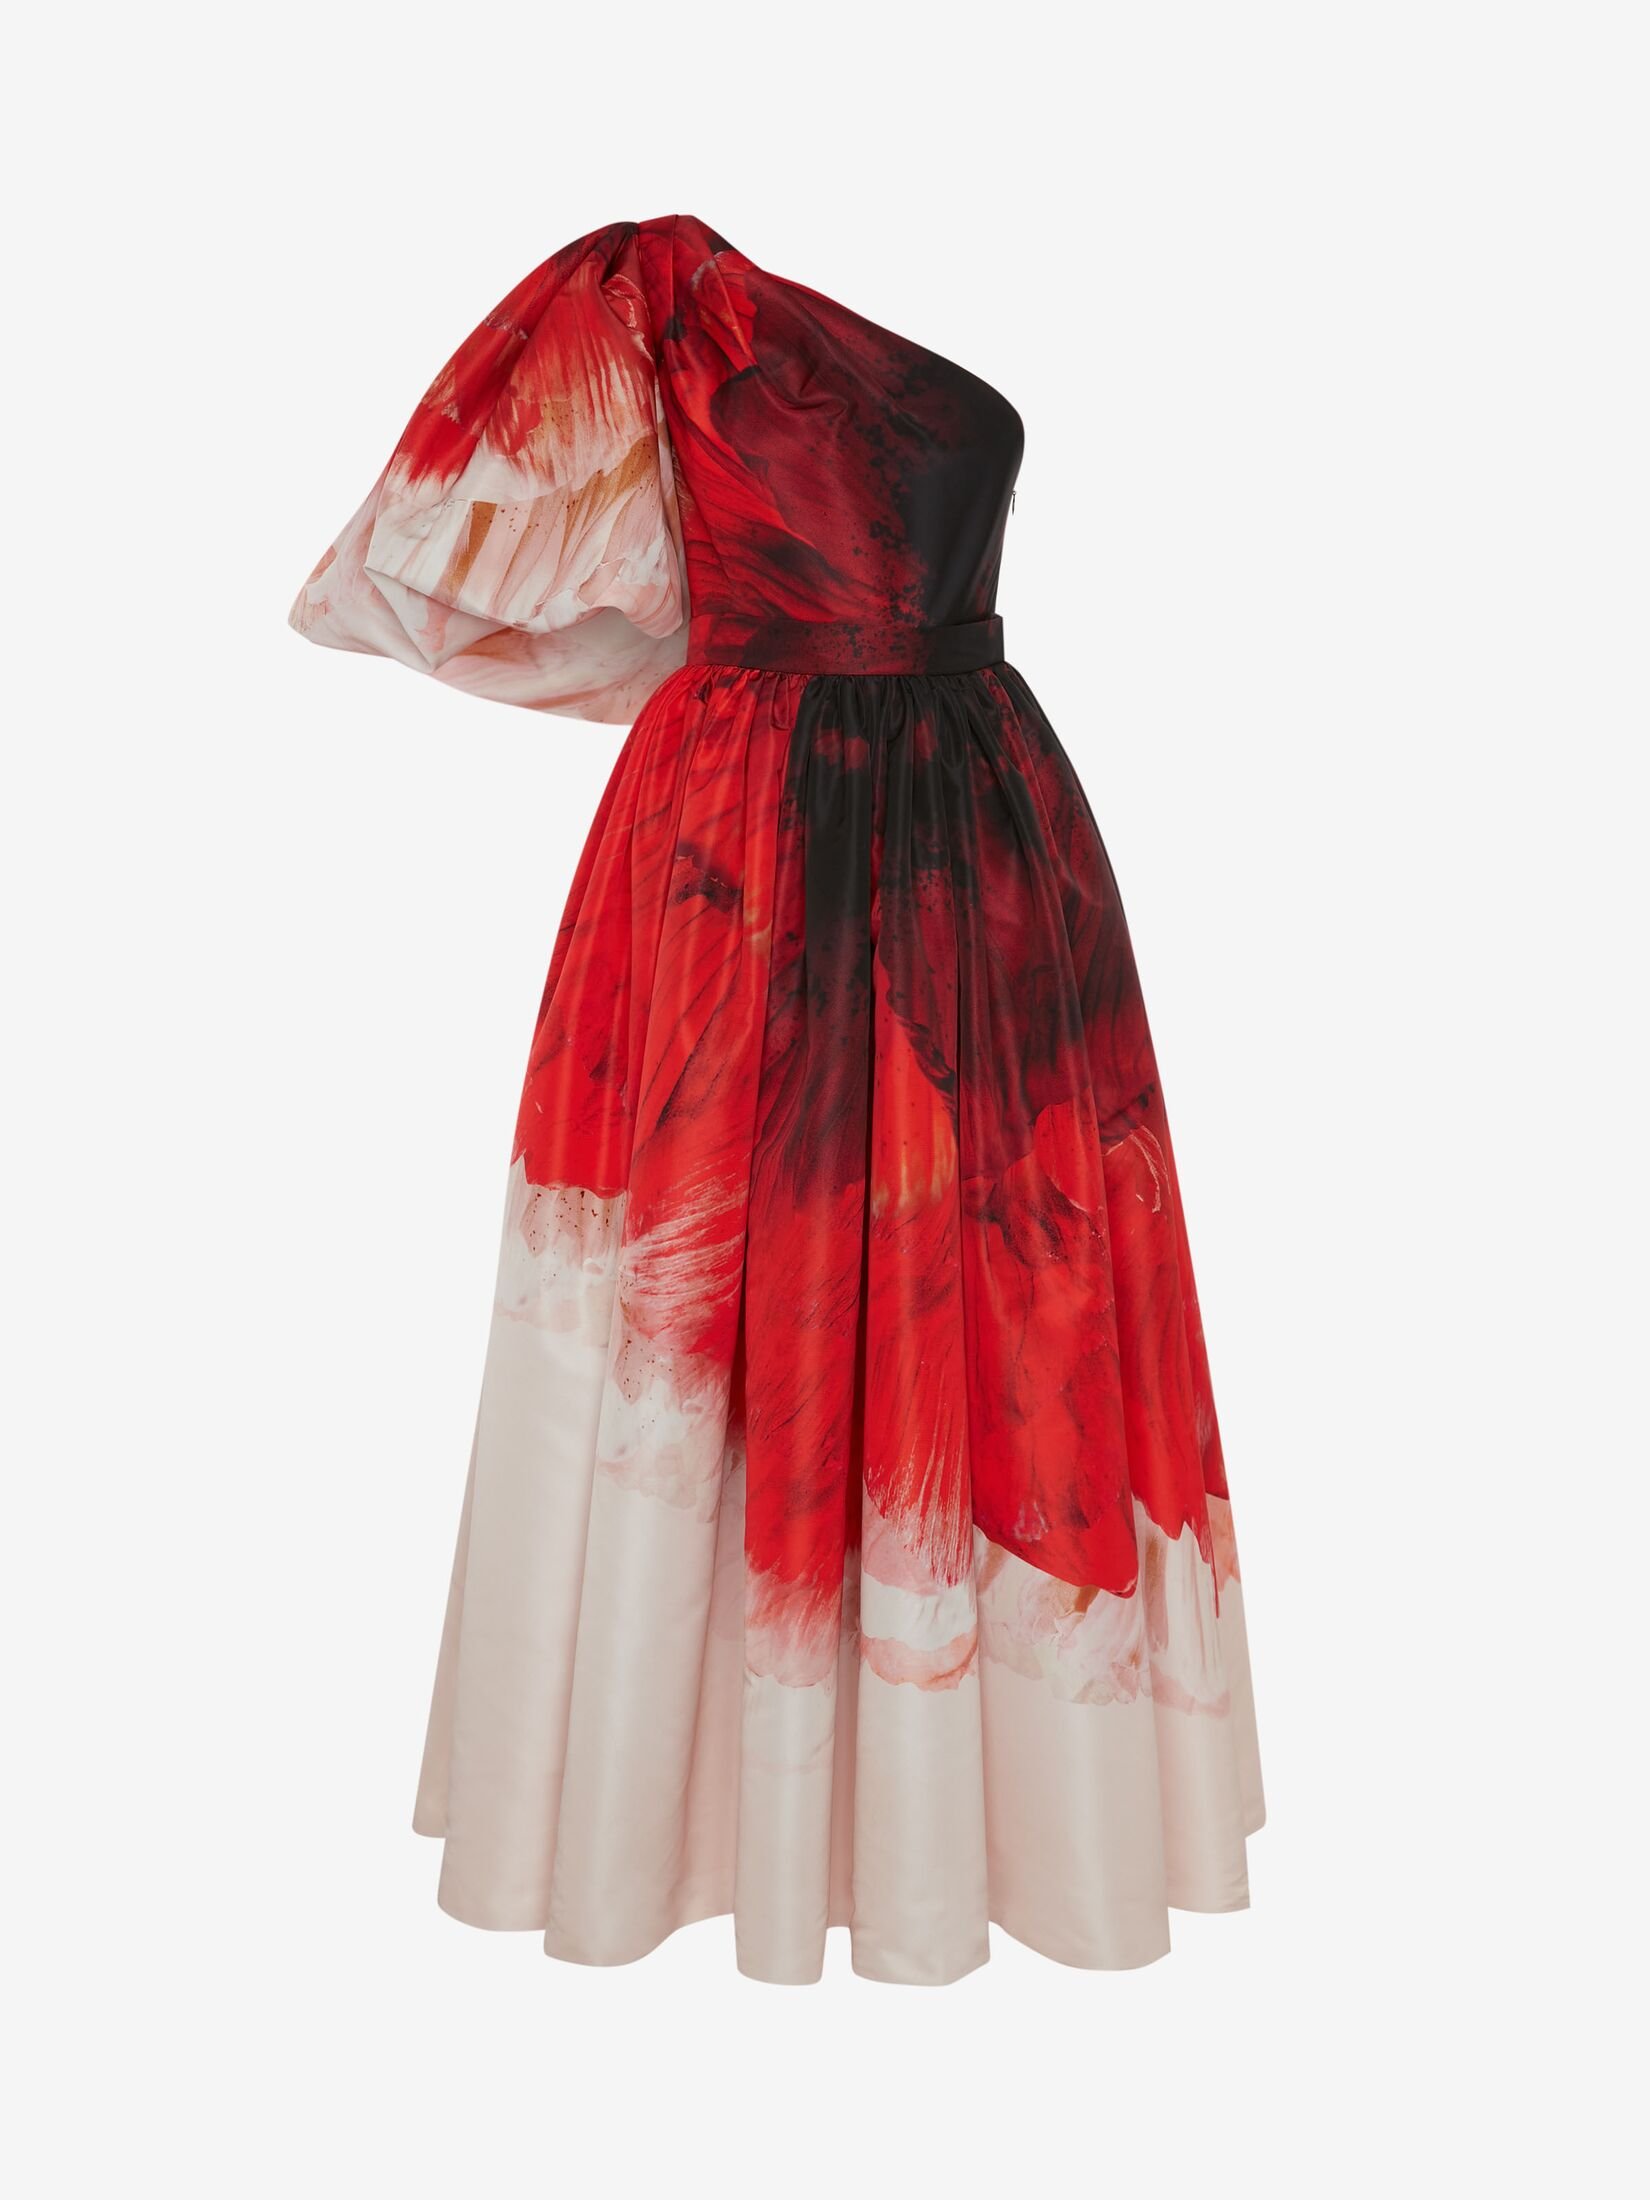 Alexander McQueen Asymmetric Draped Sleeve Dress in Red — UFO No More